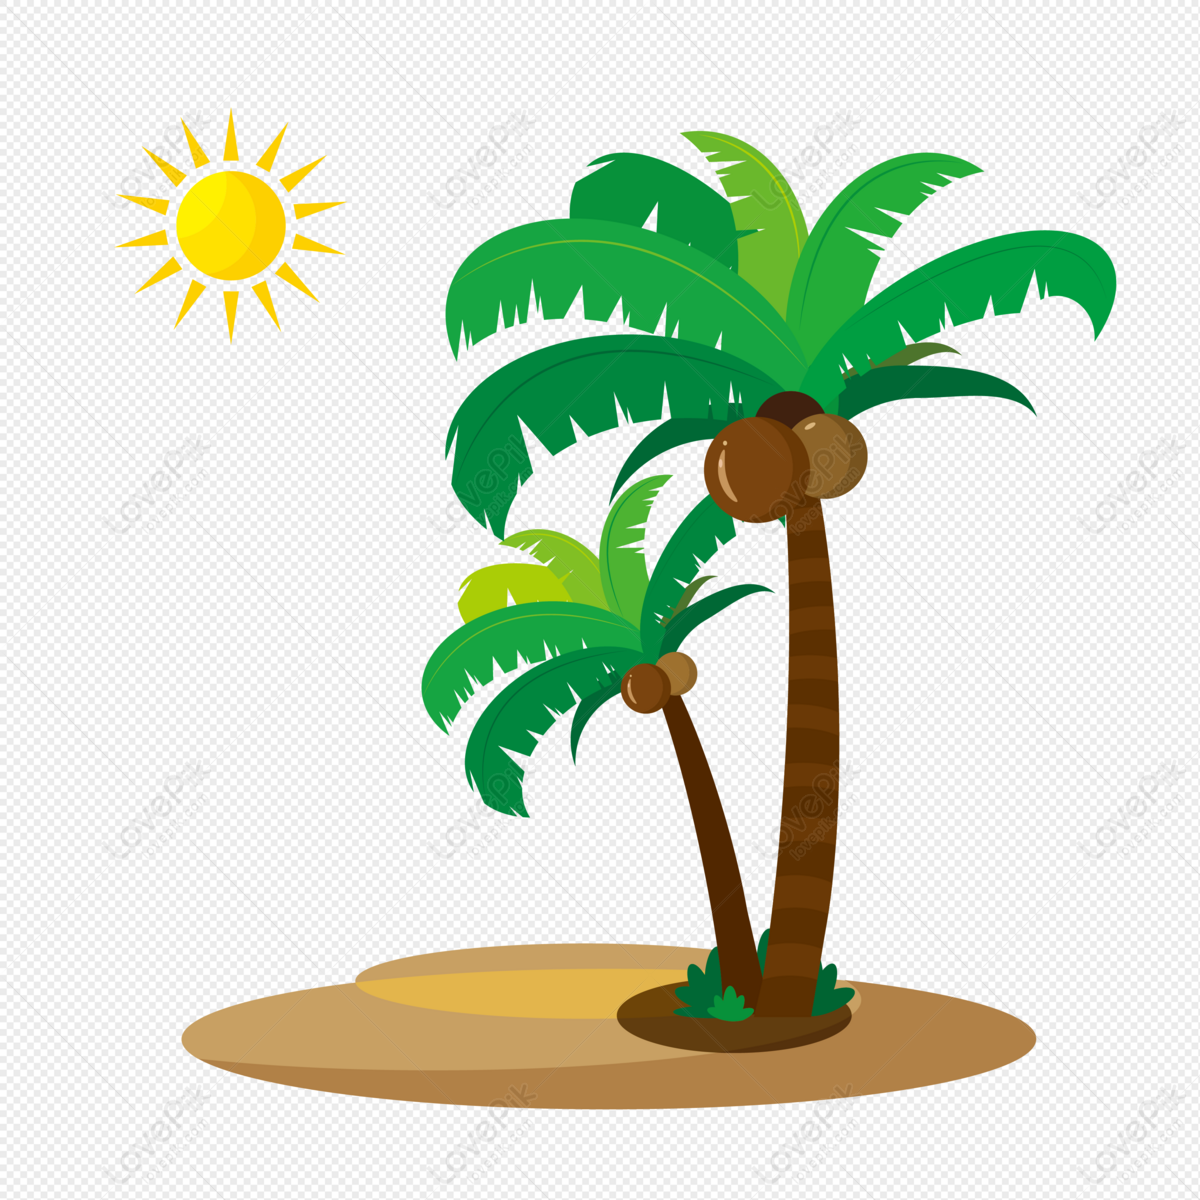 MS Paint drawing - How to draw Coconut tree/ Palm tree beach - Request  video - YouTube